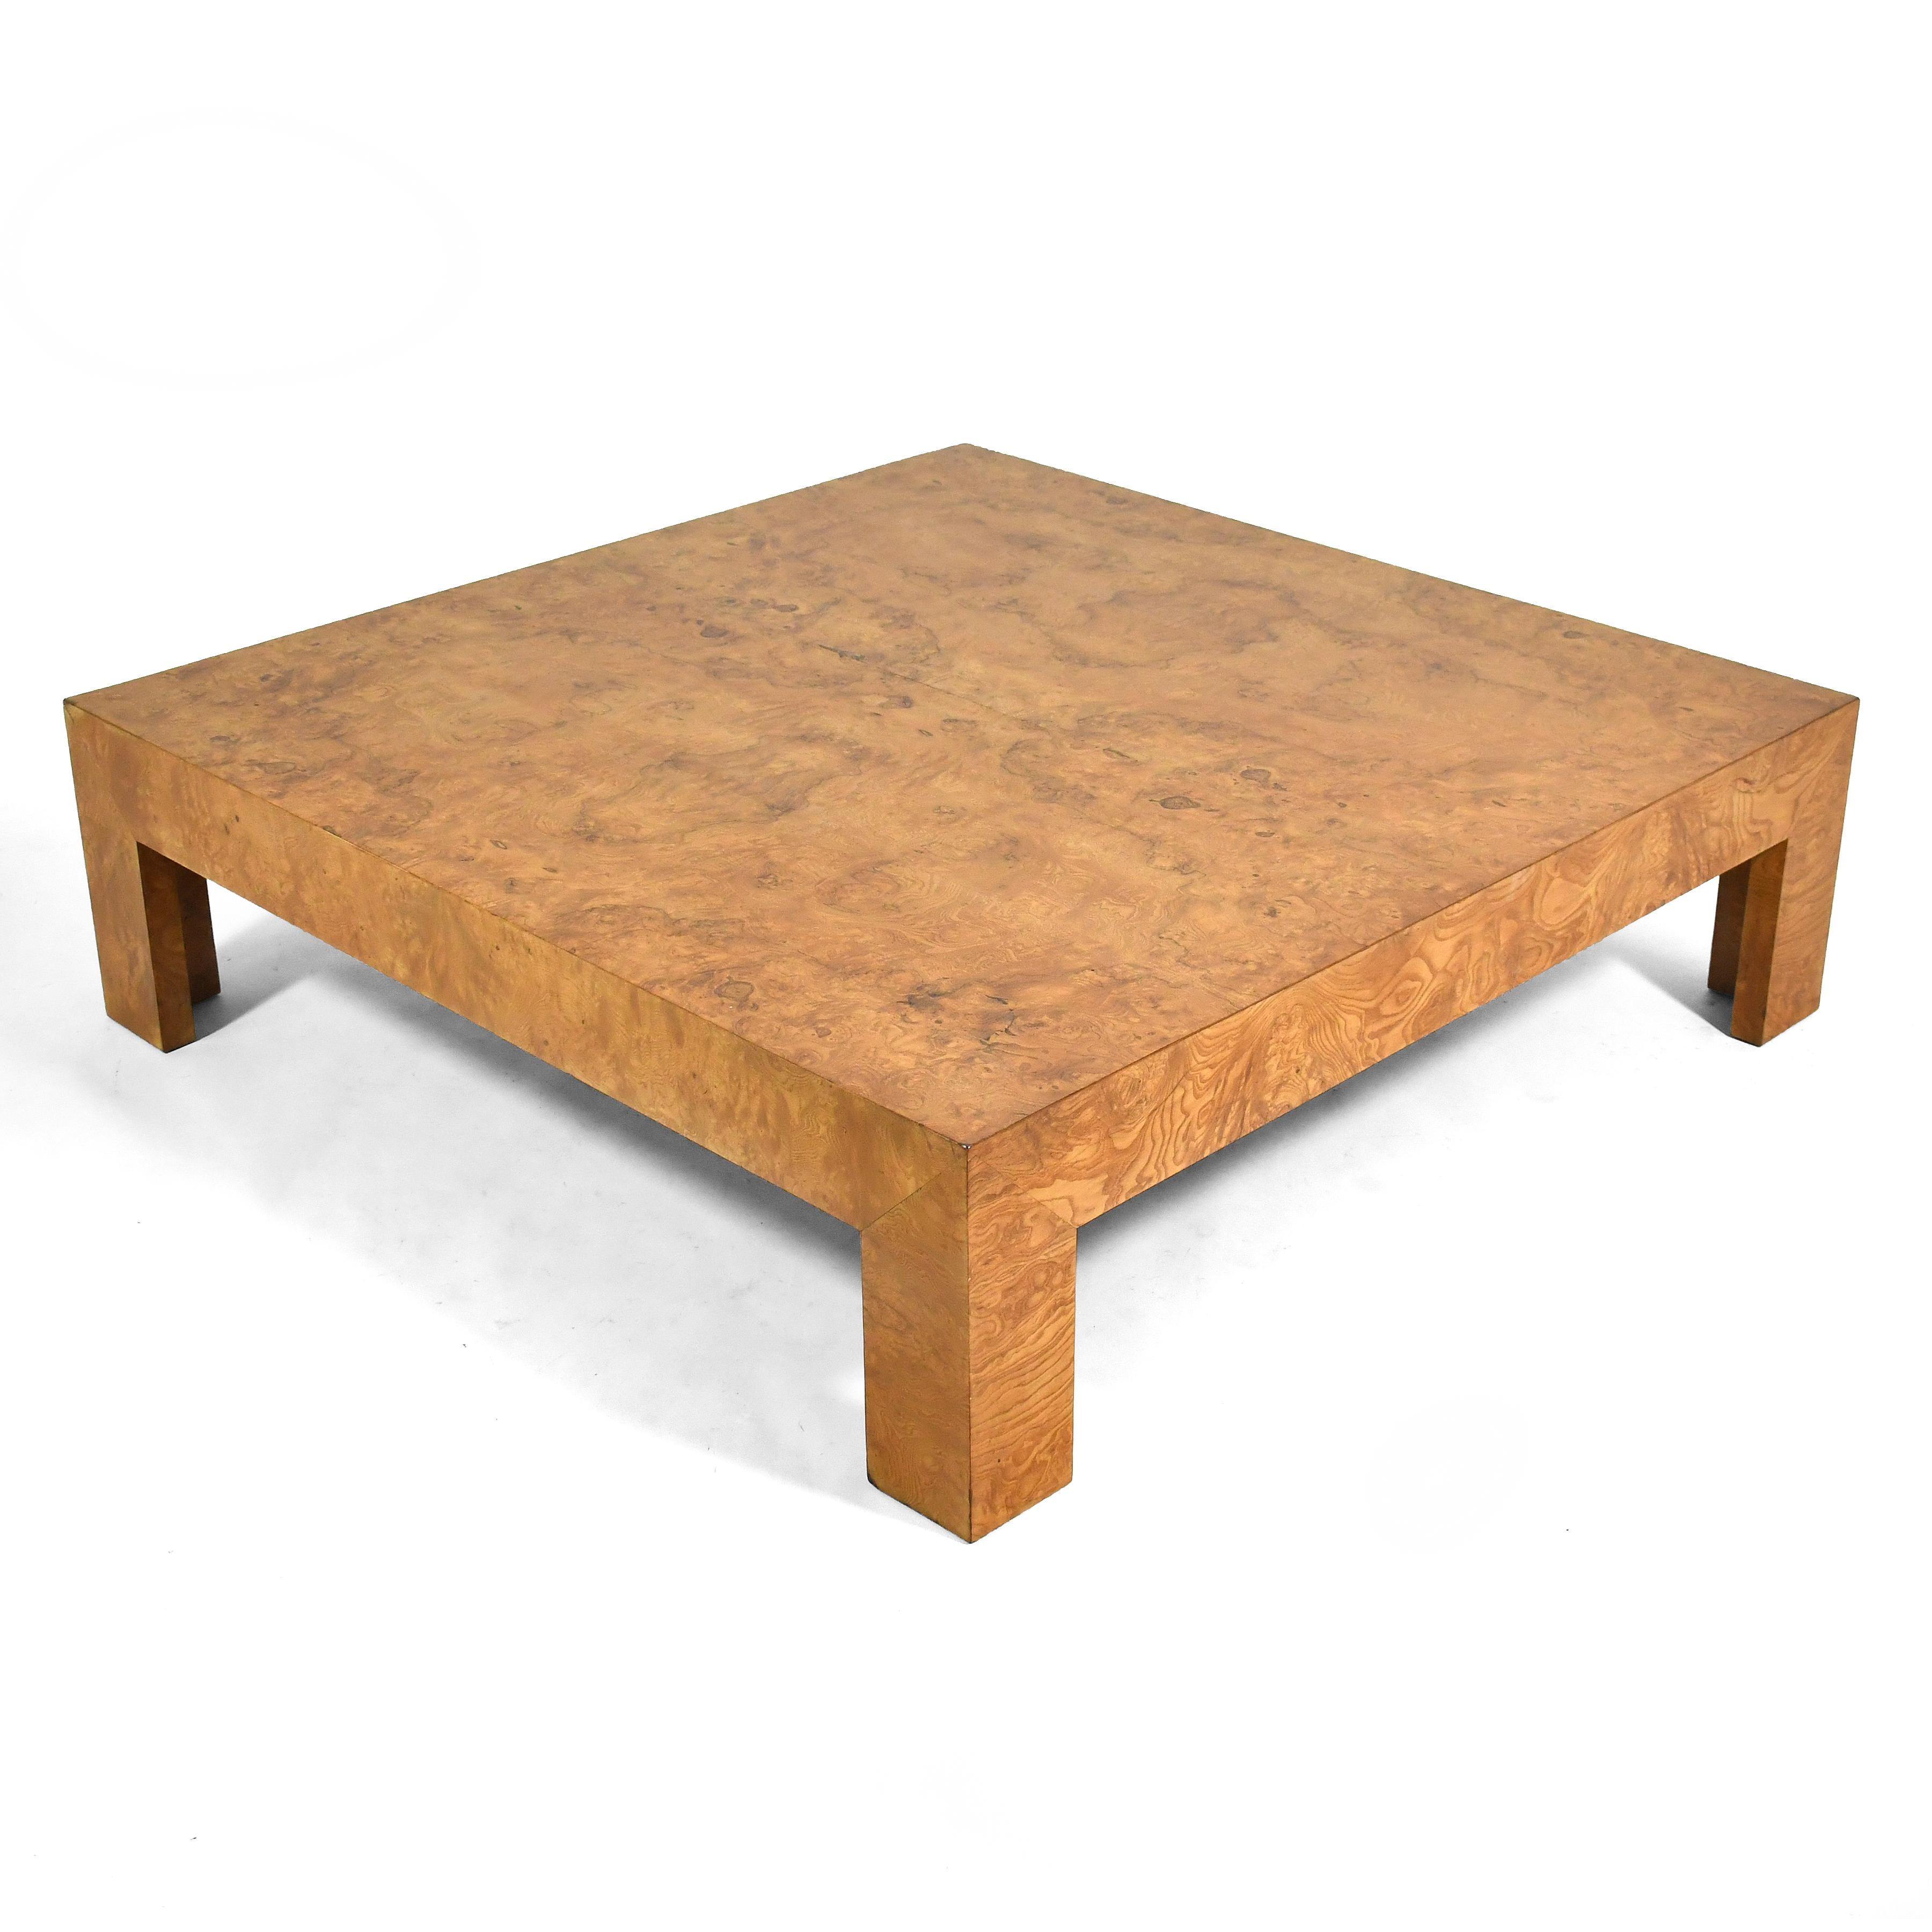 Over 2,900 square inches of beautiful burled wood cover this large, dramatic coffee table by Milo Baughman for Directional. This table would be a striking centerpiece of a substantial seating group and the perfect platform for art and decorative